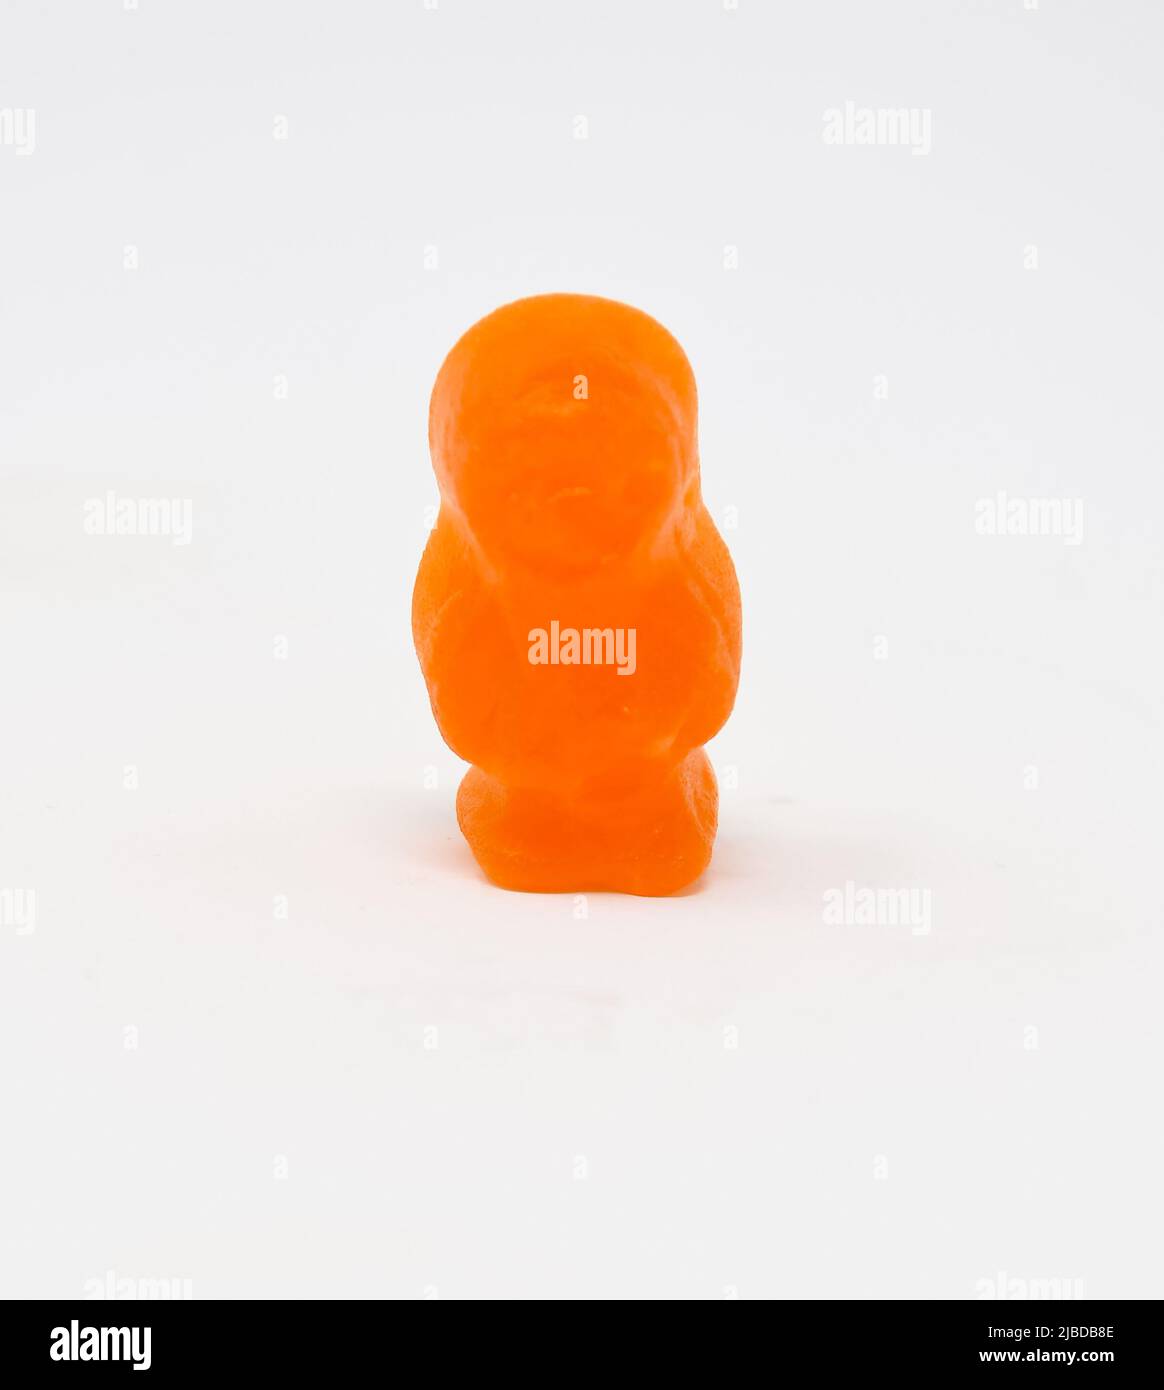 A close up photo of a Orange Jelly baby Stock Photo